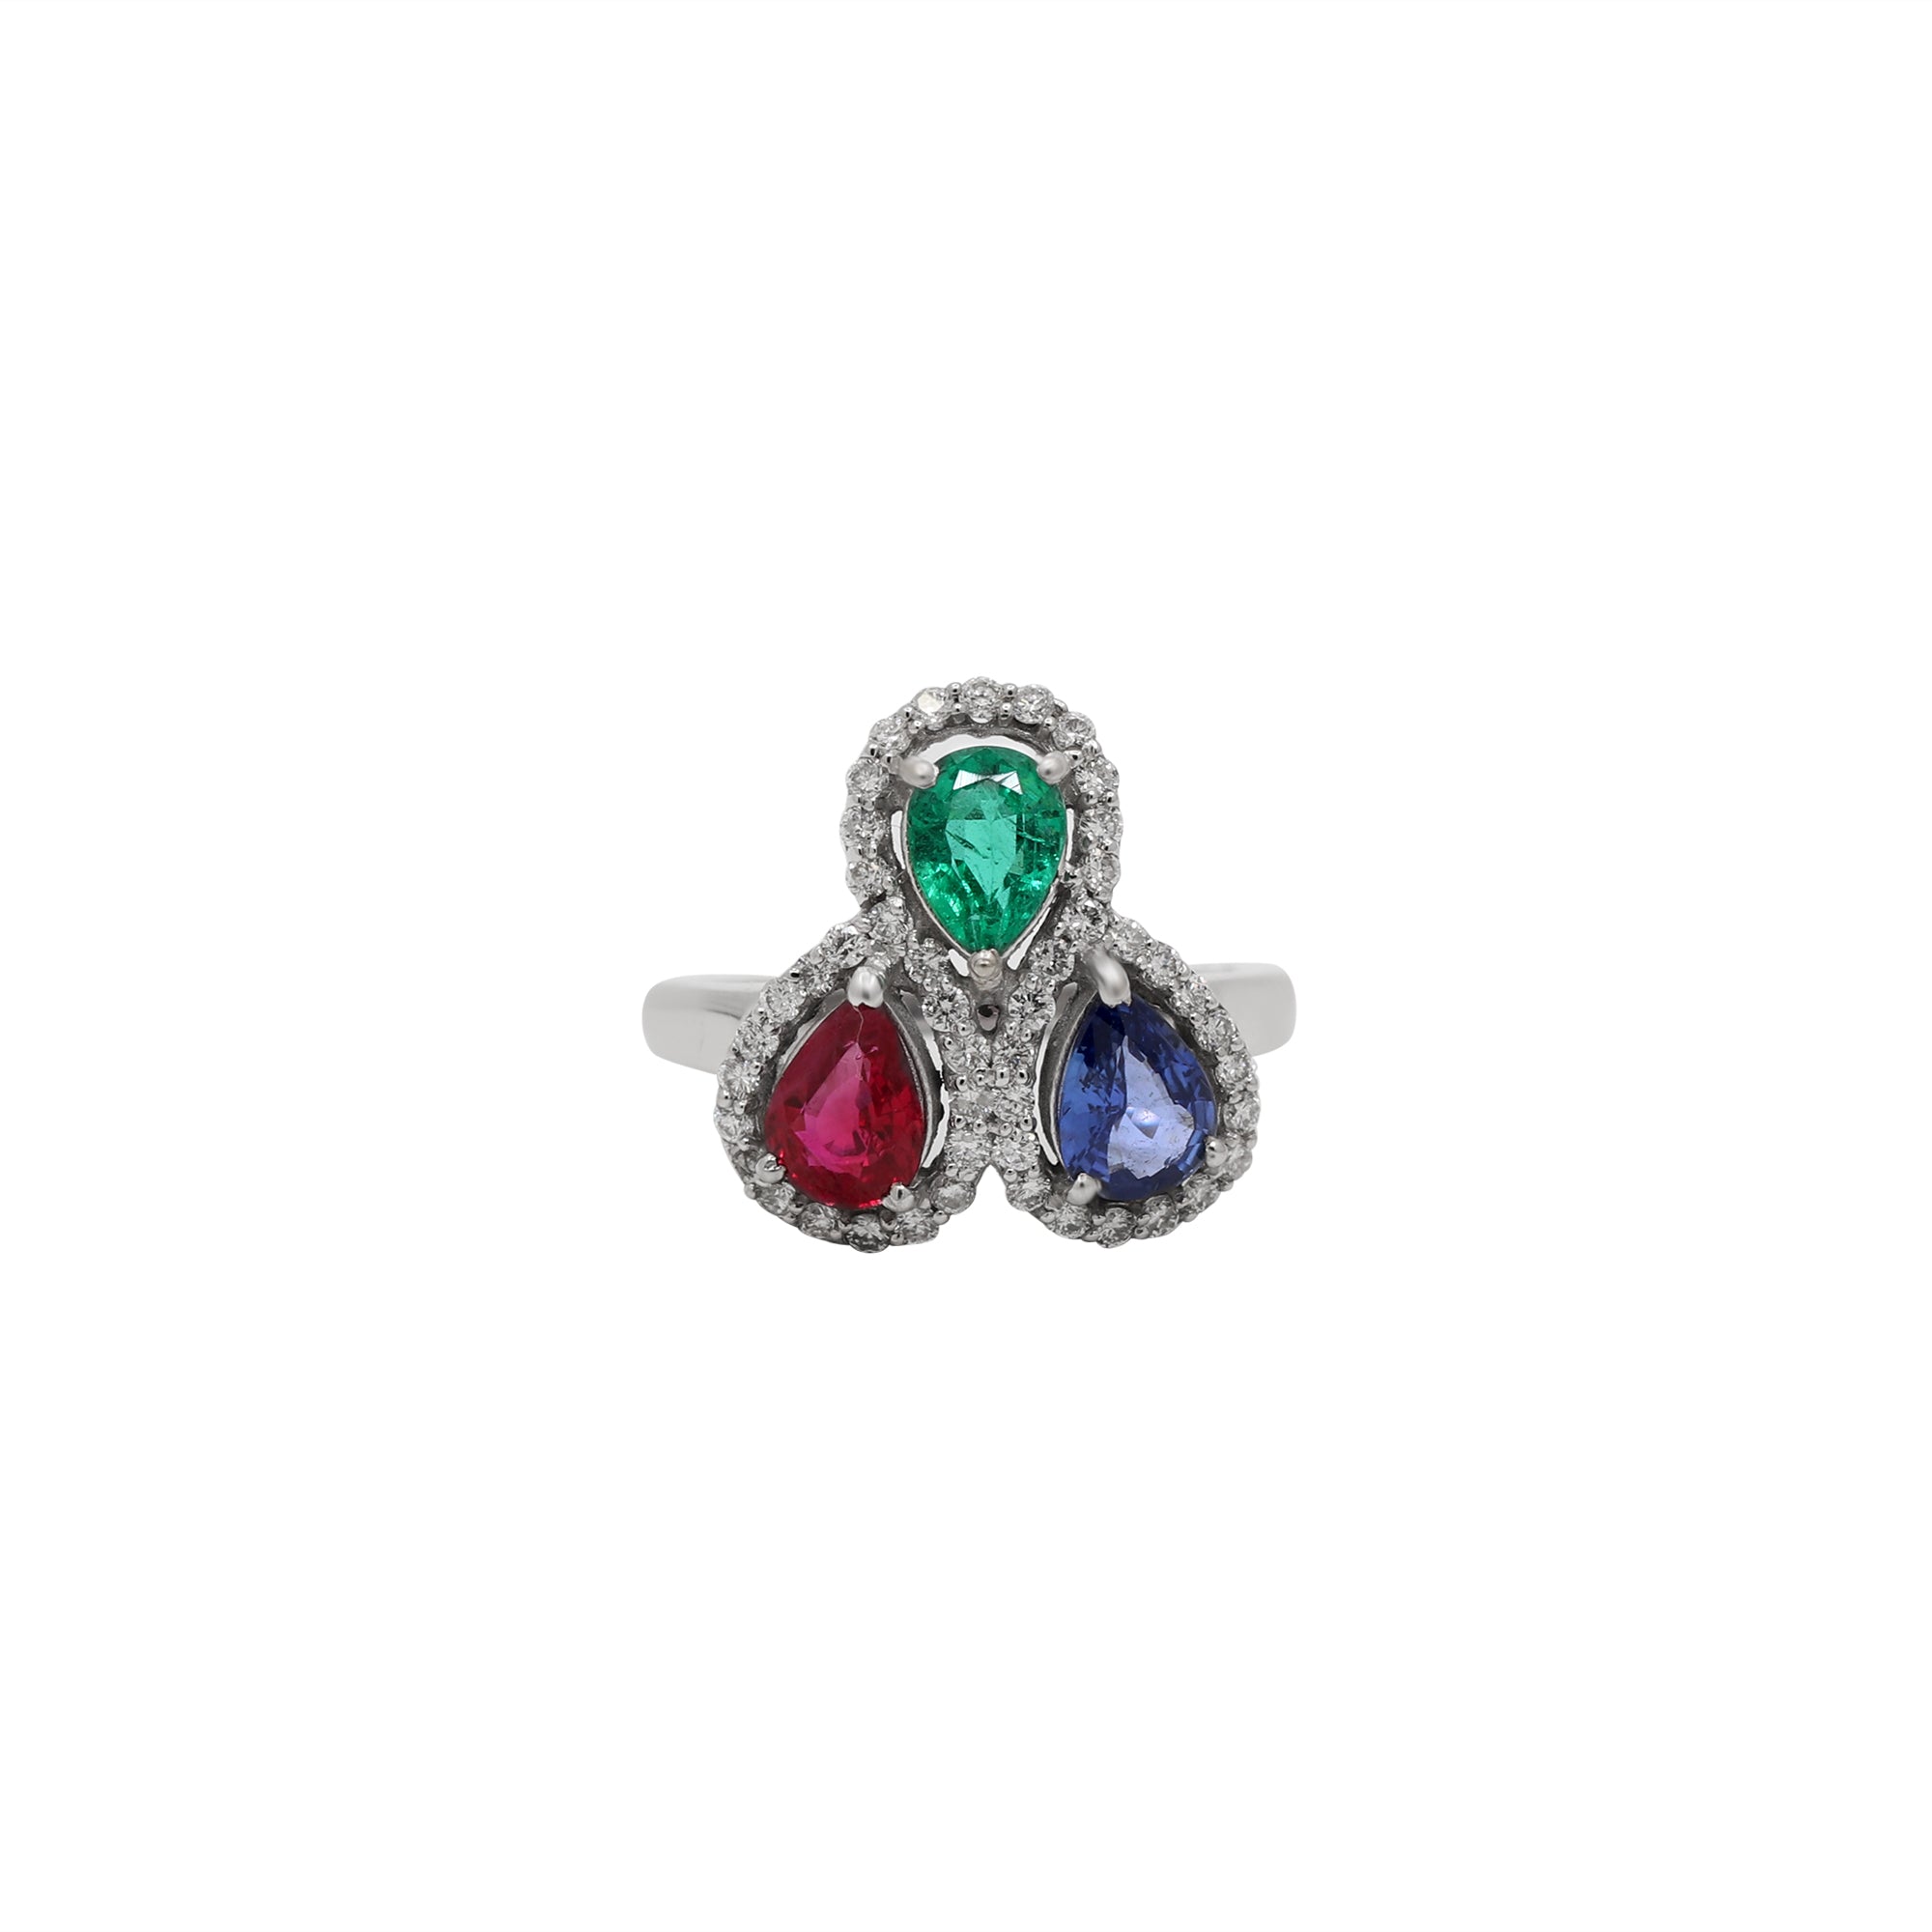 98% Green And Red Ruby Emerald Ring, Size: 5mm, Carat: 1+1 = 2cts at Rs  40000 in Jaipur